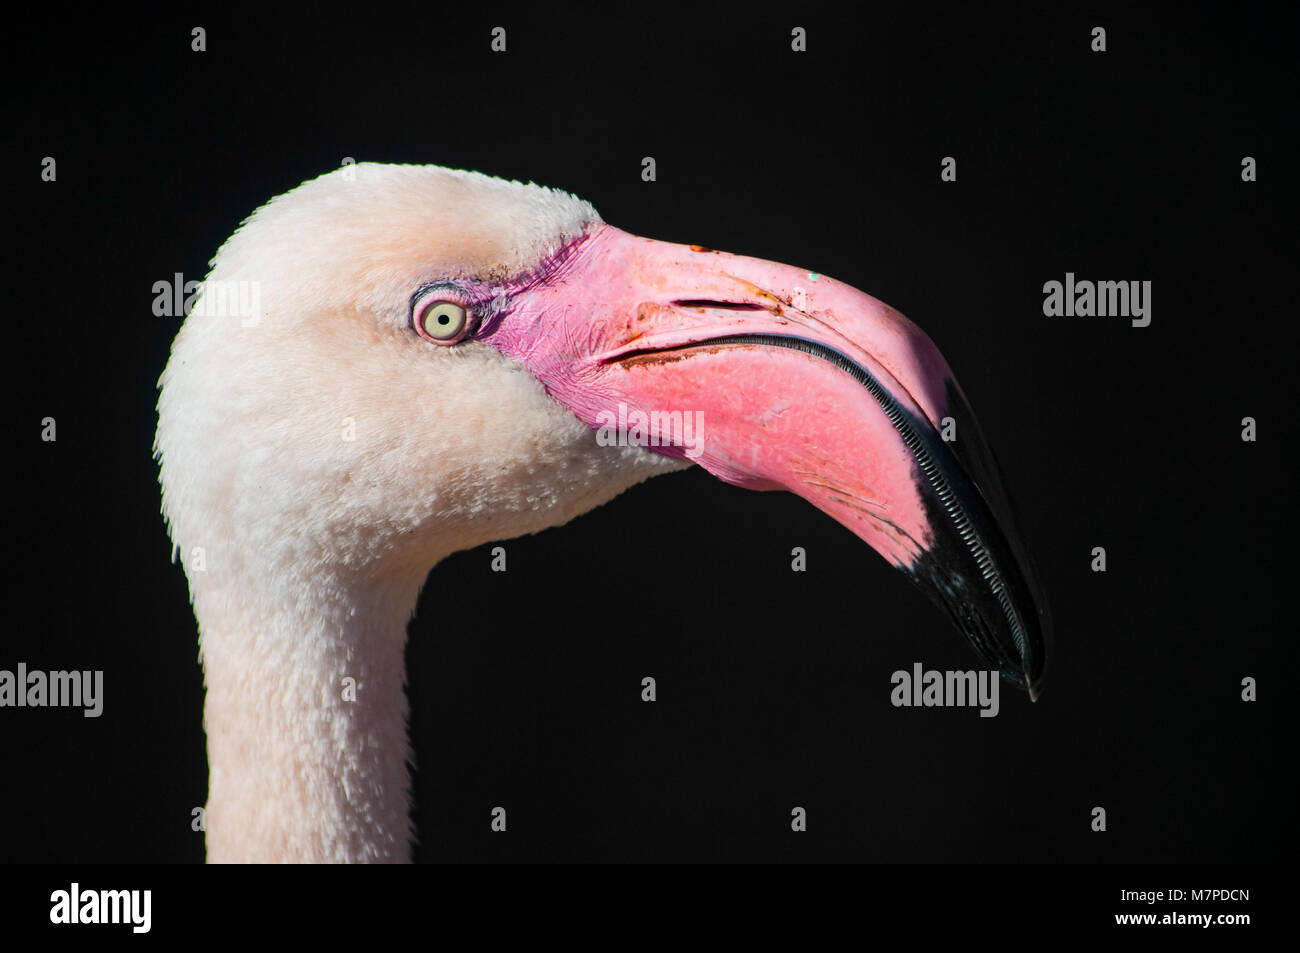 Close up of a Pink Flamingo on a black background Stock Photo